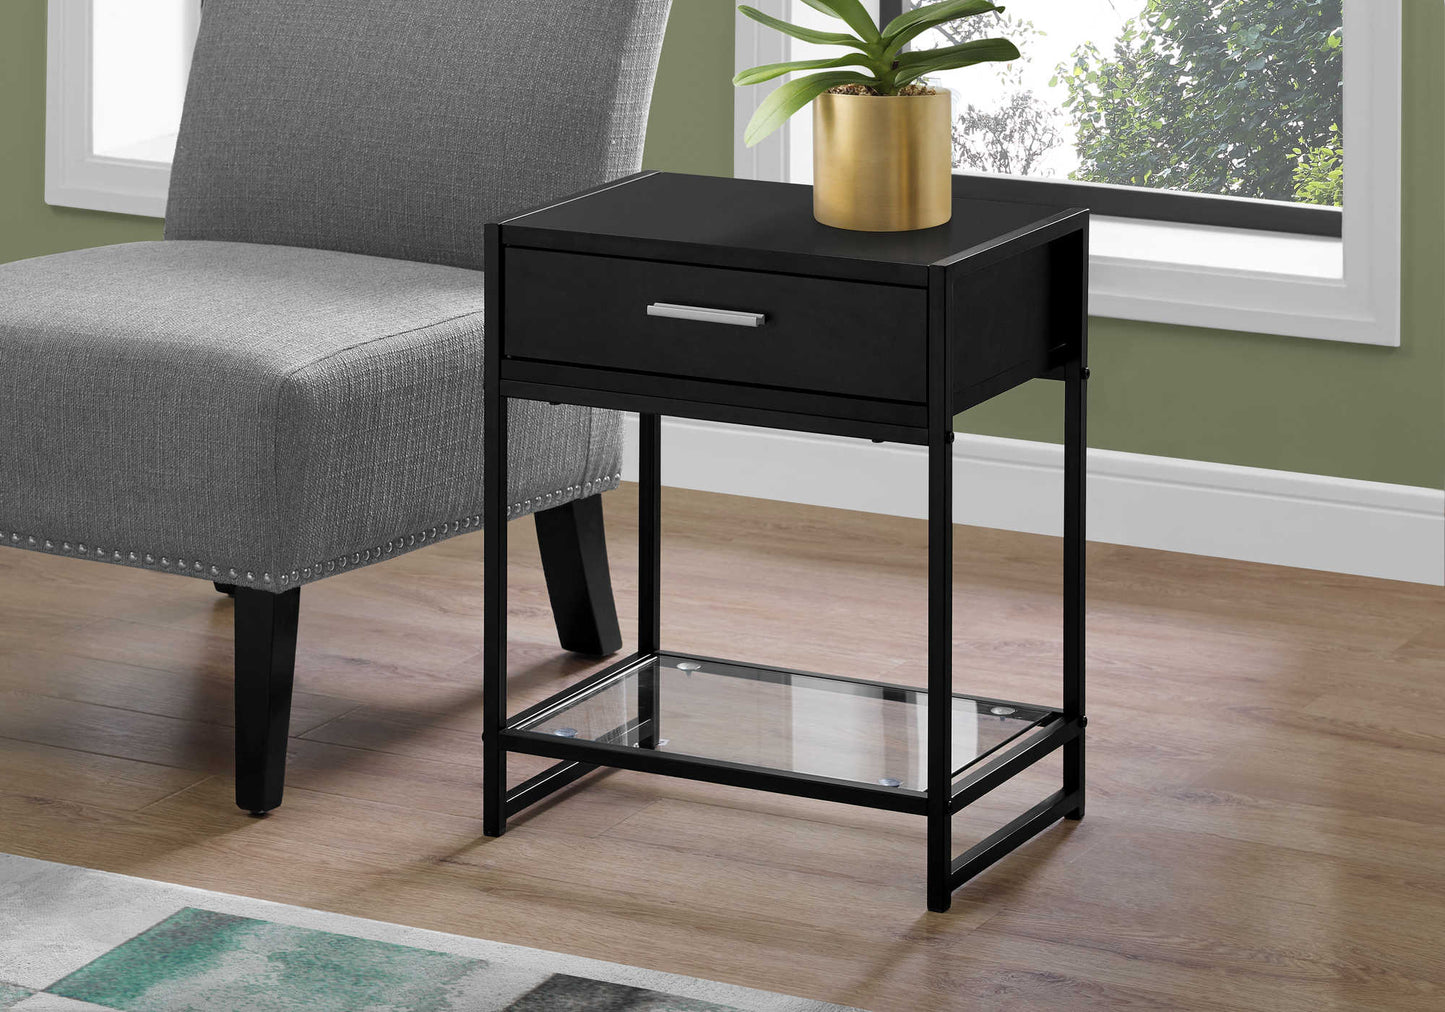 18"L/22"H Modern Laminate Nightstand with Metal Frame and Glass Shelf